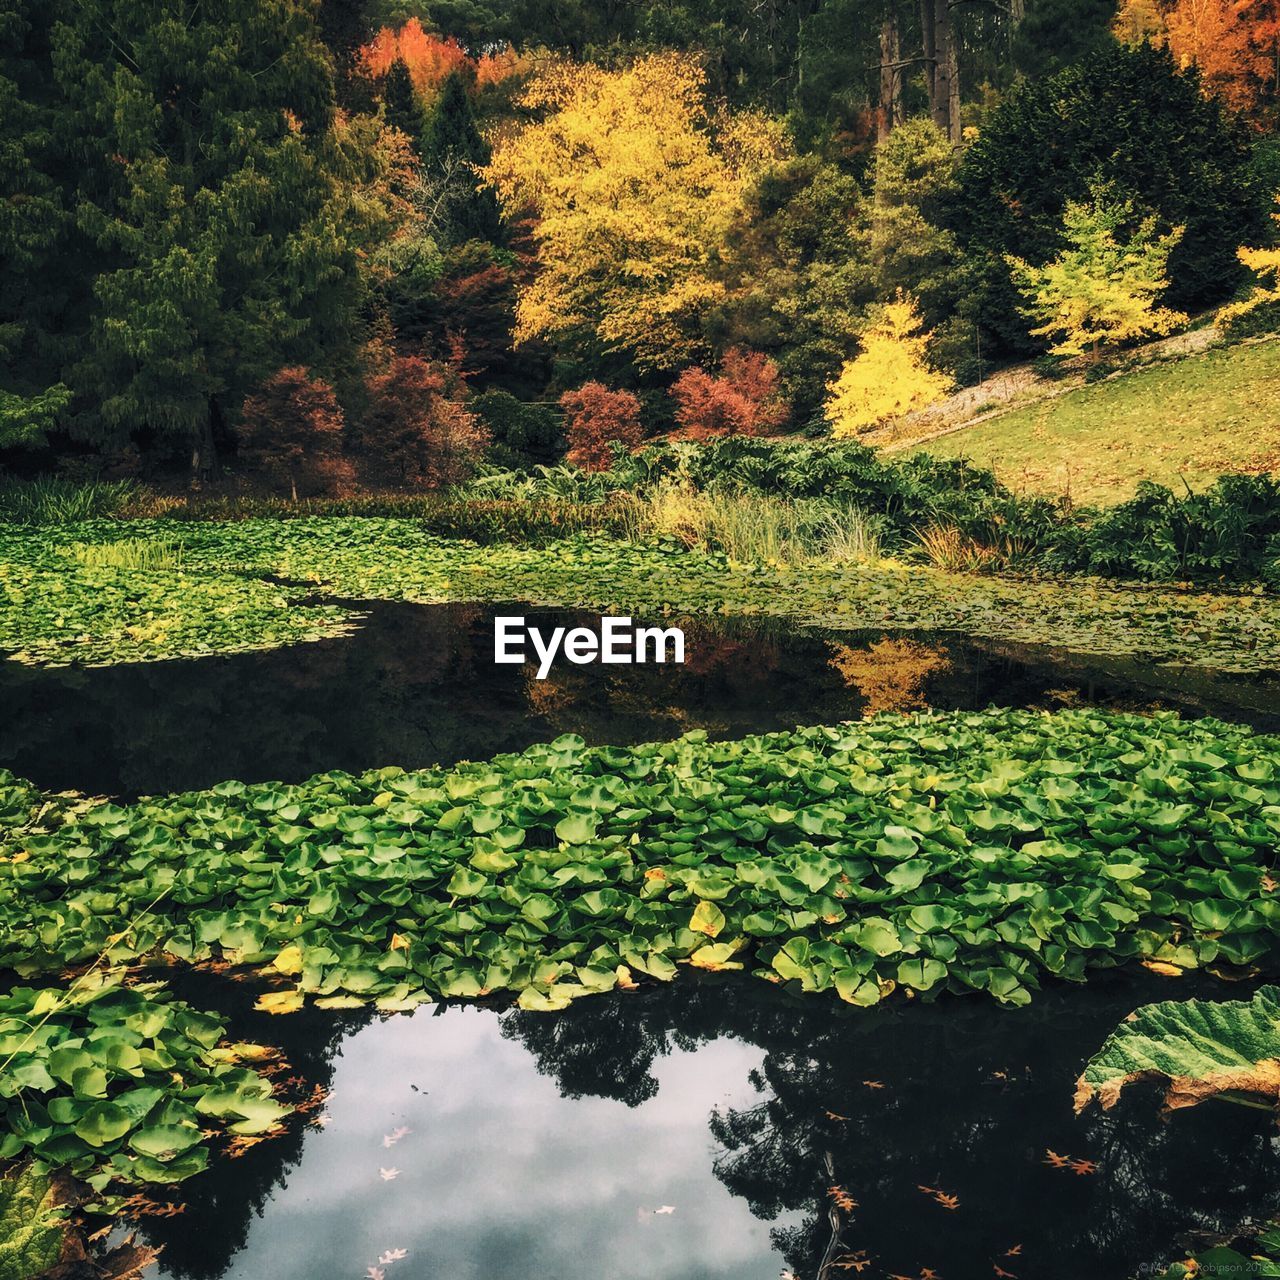 Plants growing in pond during autumn